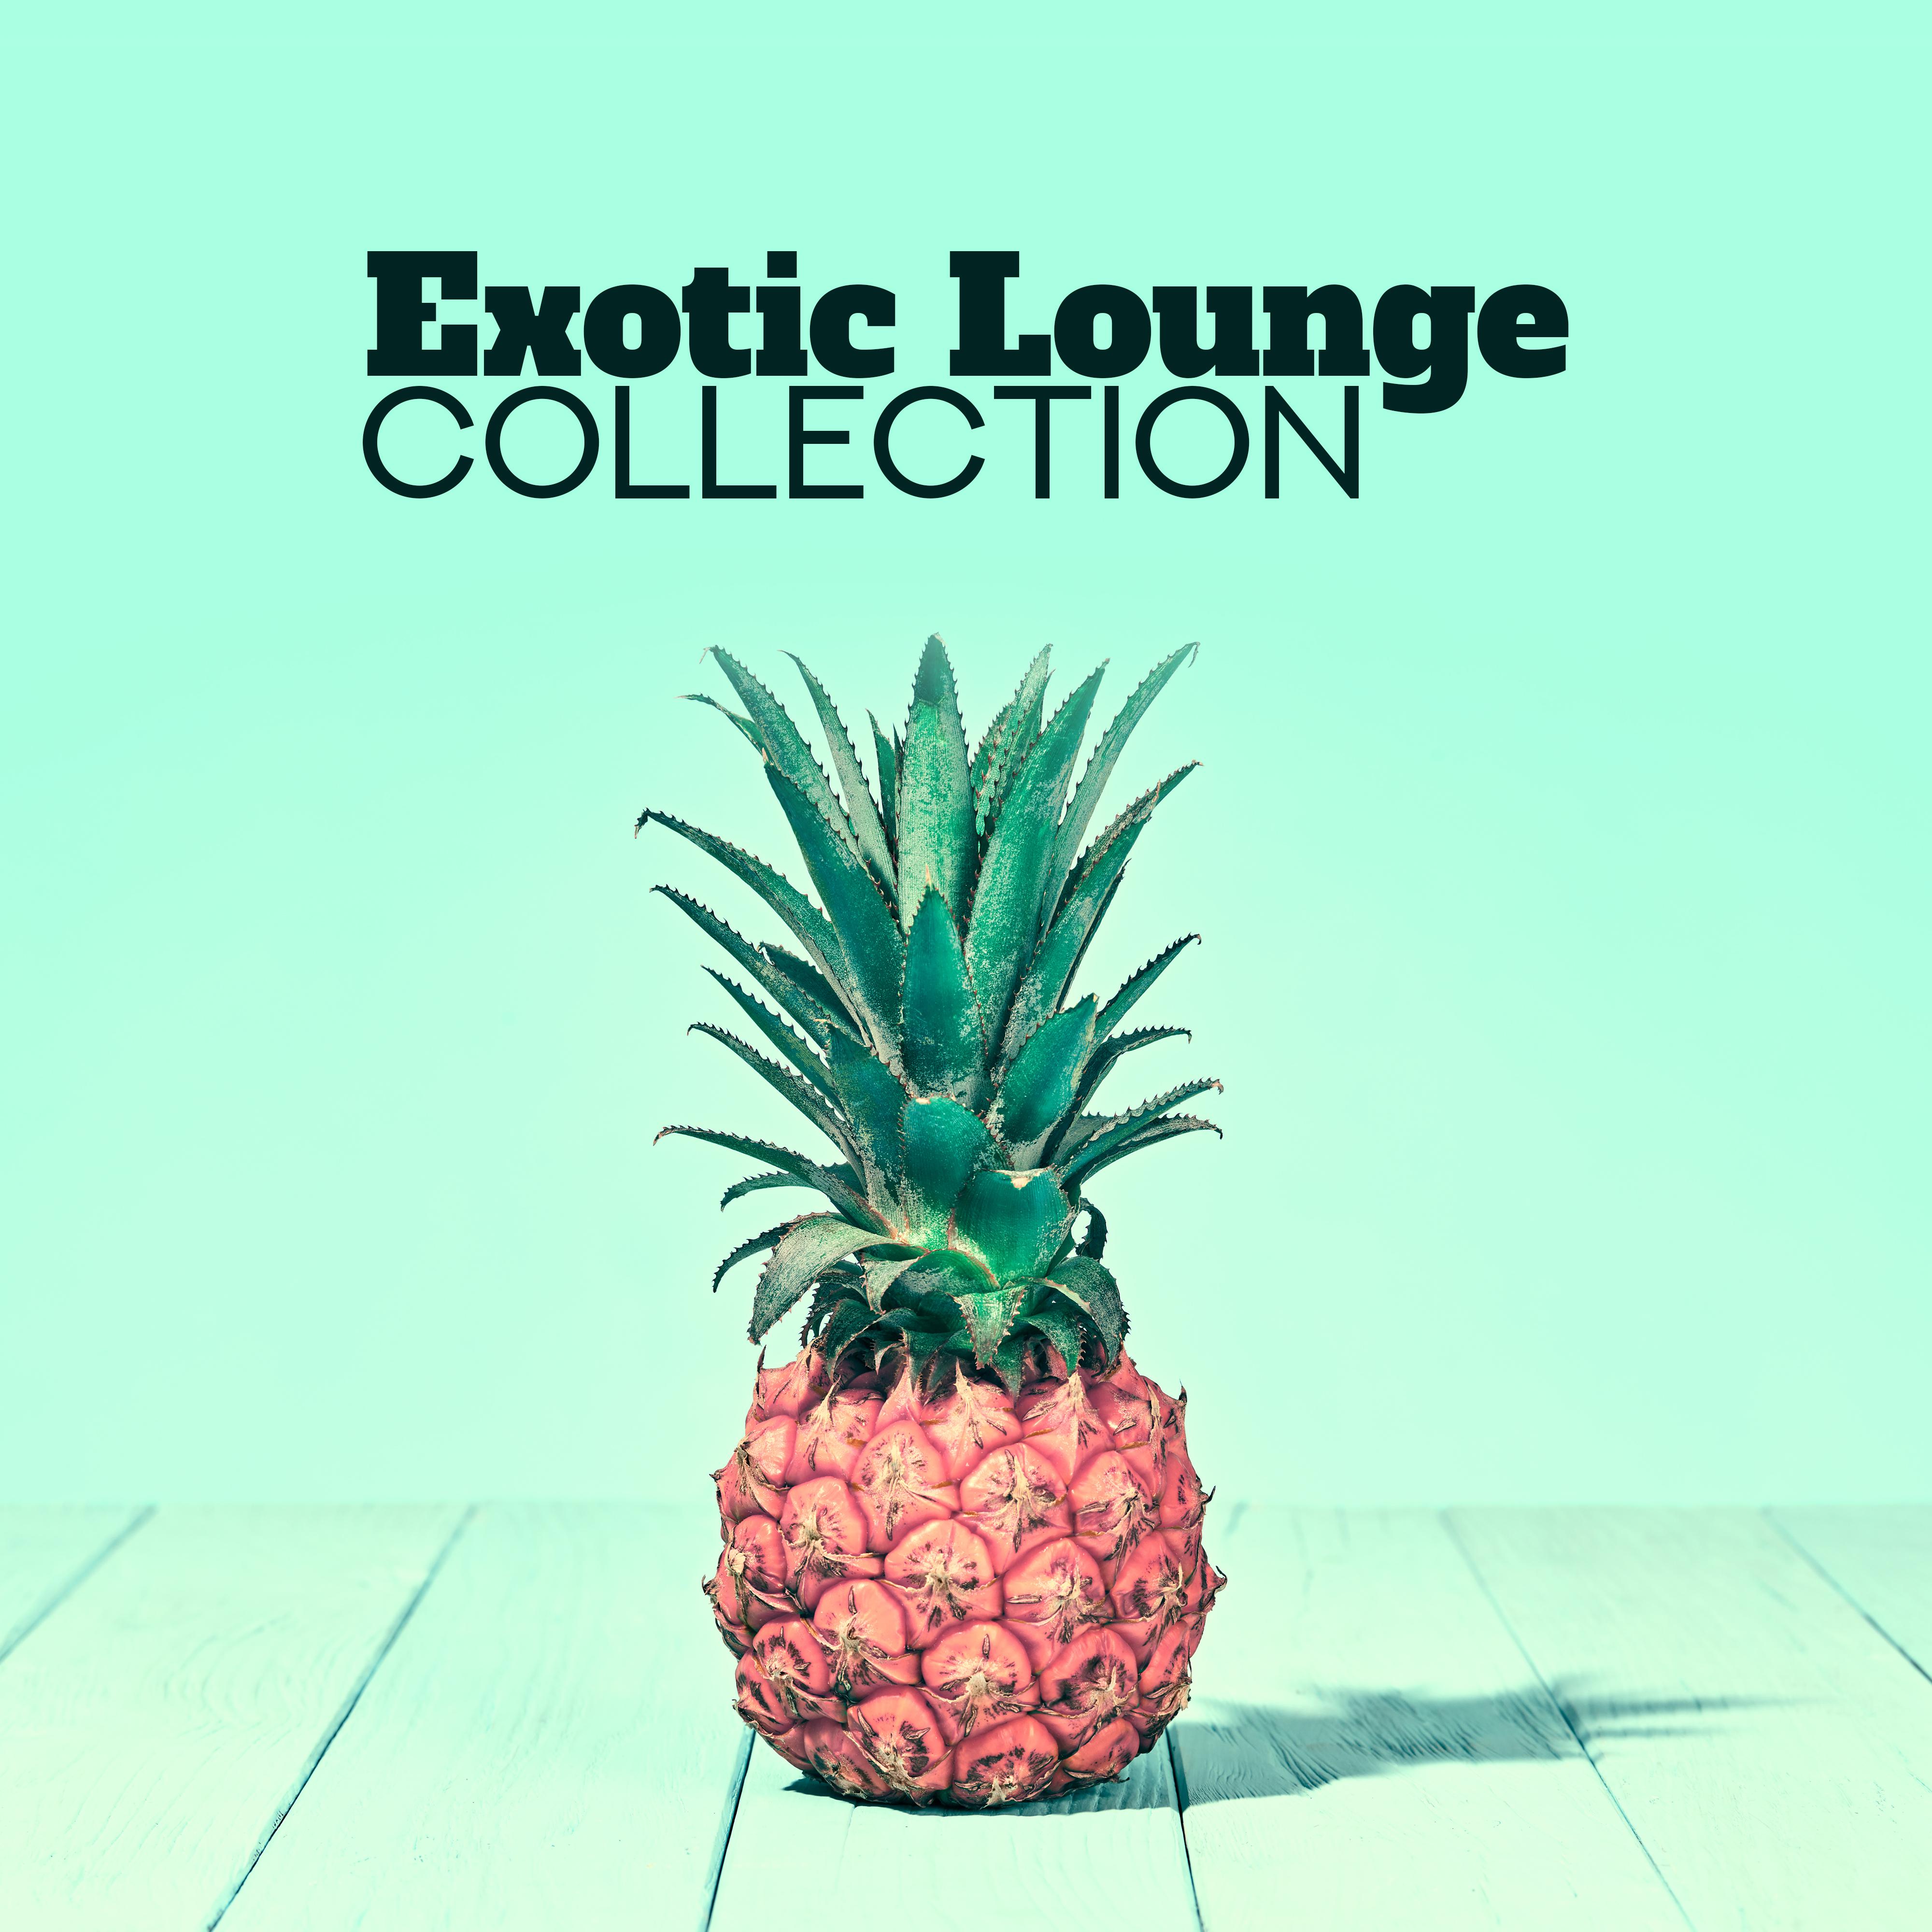 Exotic Lounge Collection – Beach Chillout, Ibiza Relaxation, Calm Down, Ibiza Lounge, Summer Music, Beach Party Vibrations, Tropical Music